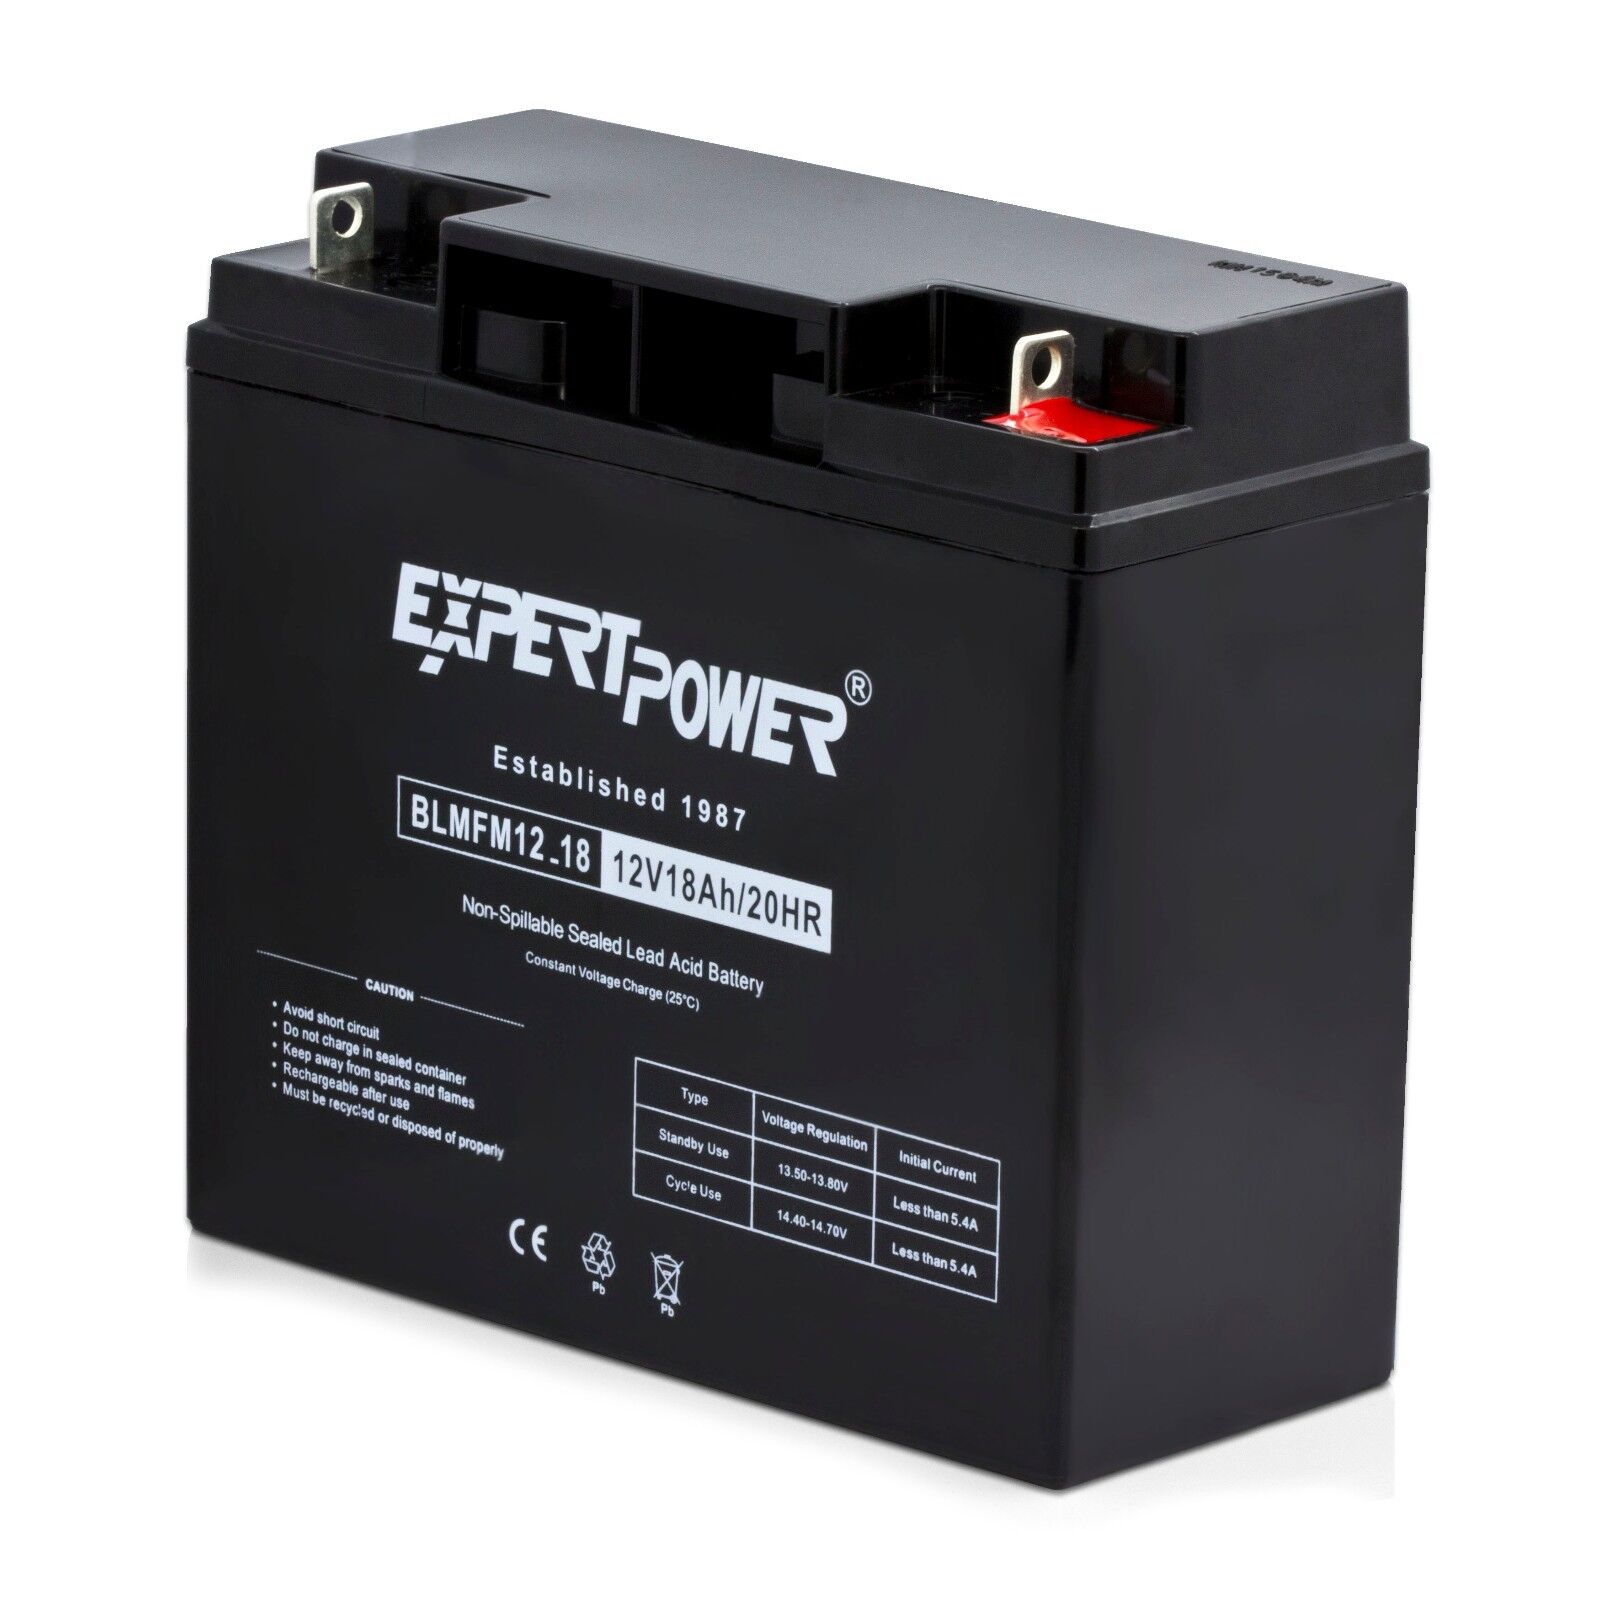 2 EXP12180 12V 18AH Battery for APC SmartUps 1400 1500 [Replacement for UB12180] ExpertPower EXP12180 - фотография #7